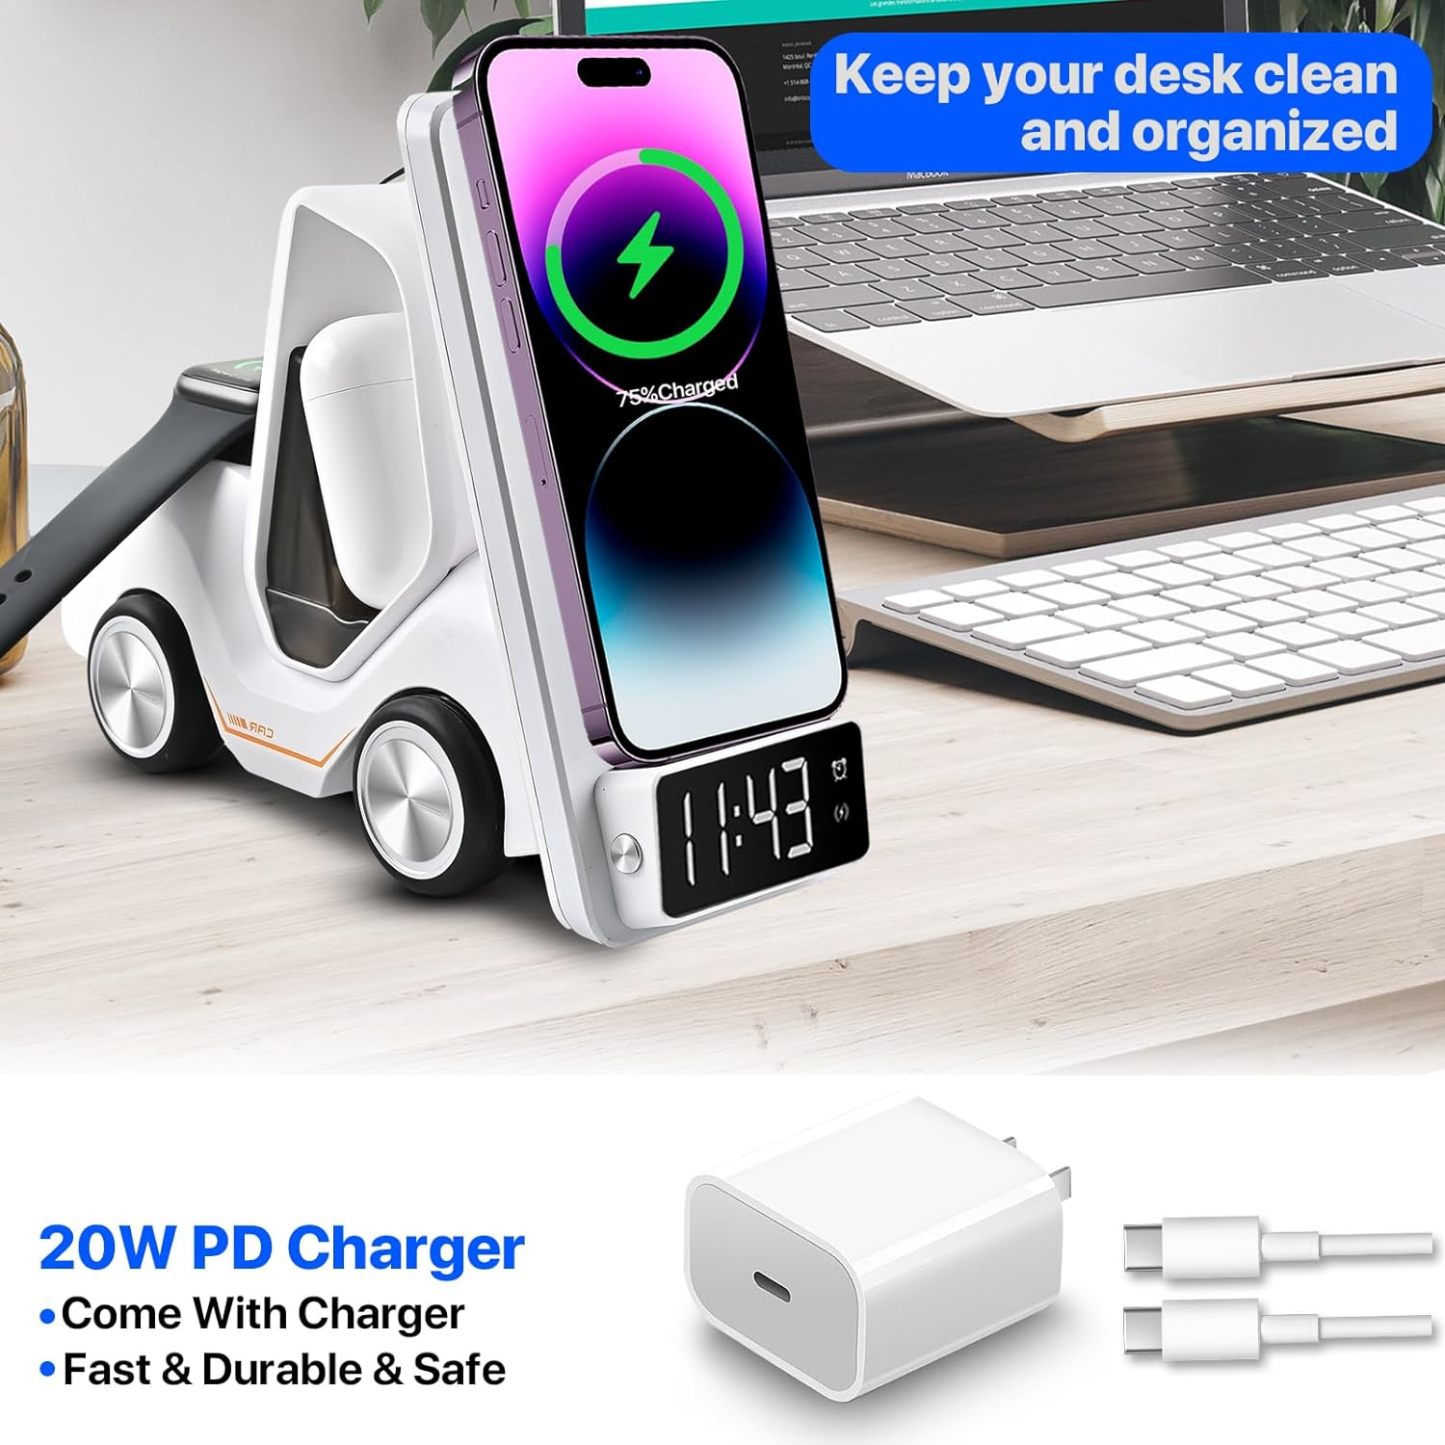 Creative forklift design-5-in-1 wireless charging station